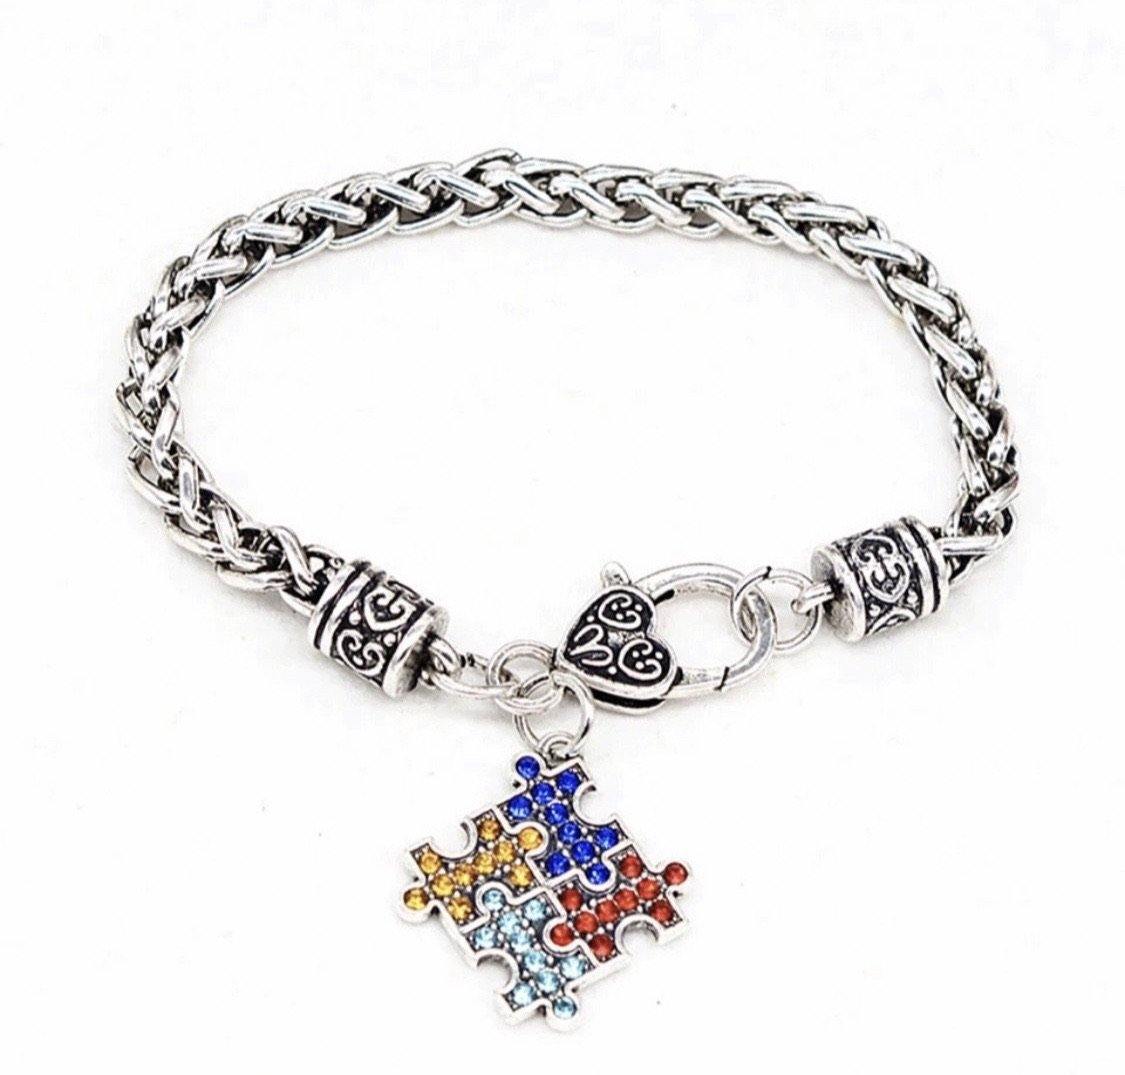 Stainless Steel Puzzle Piece Charm Bracelet